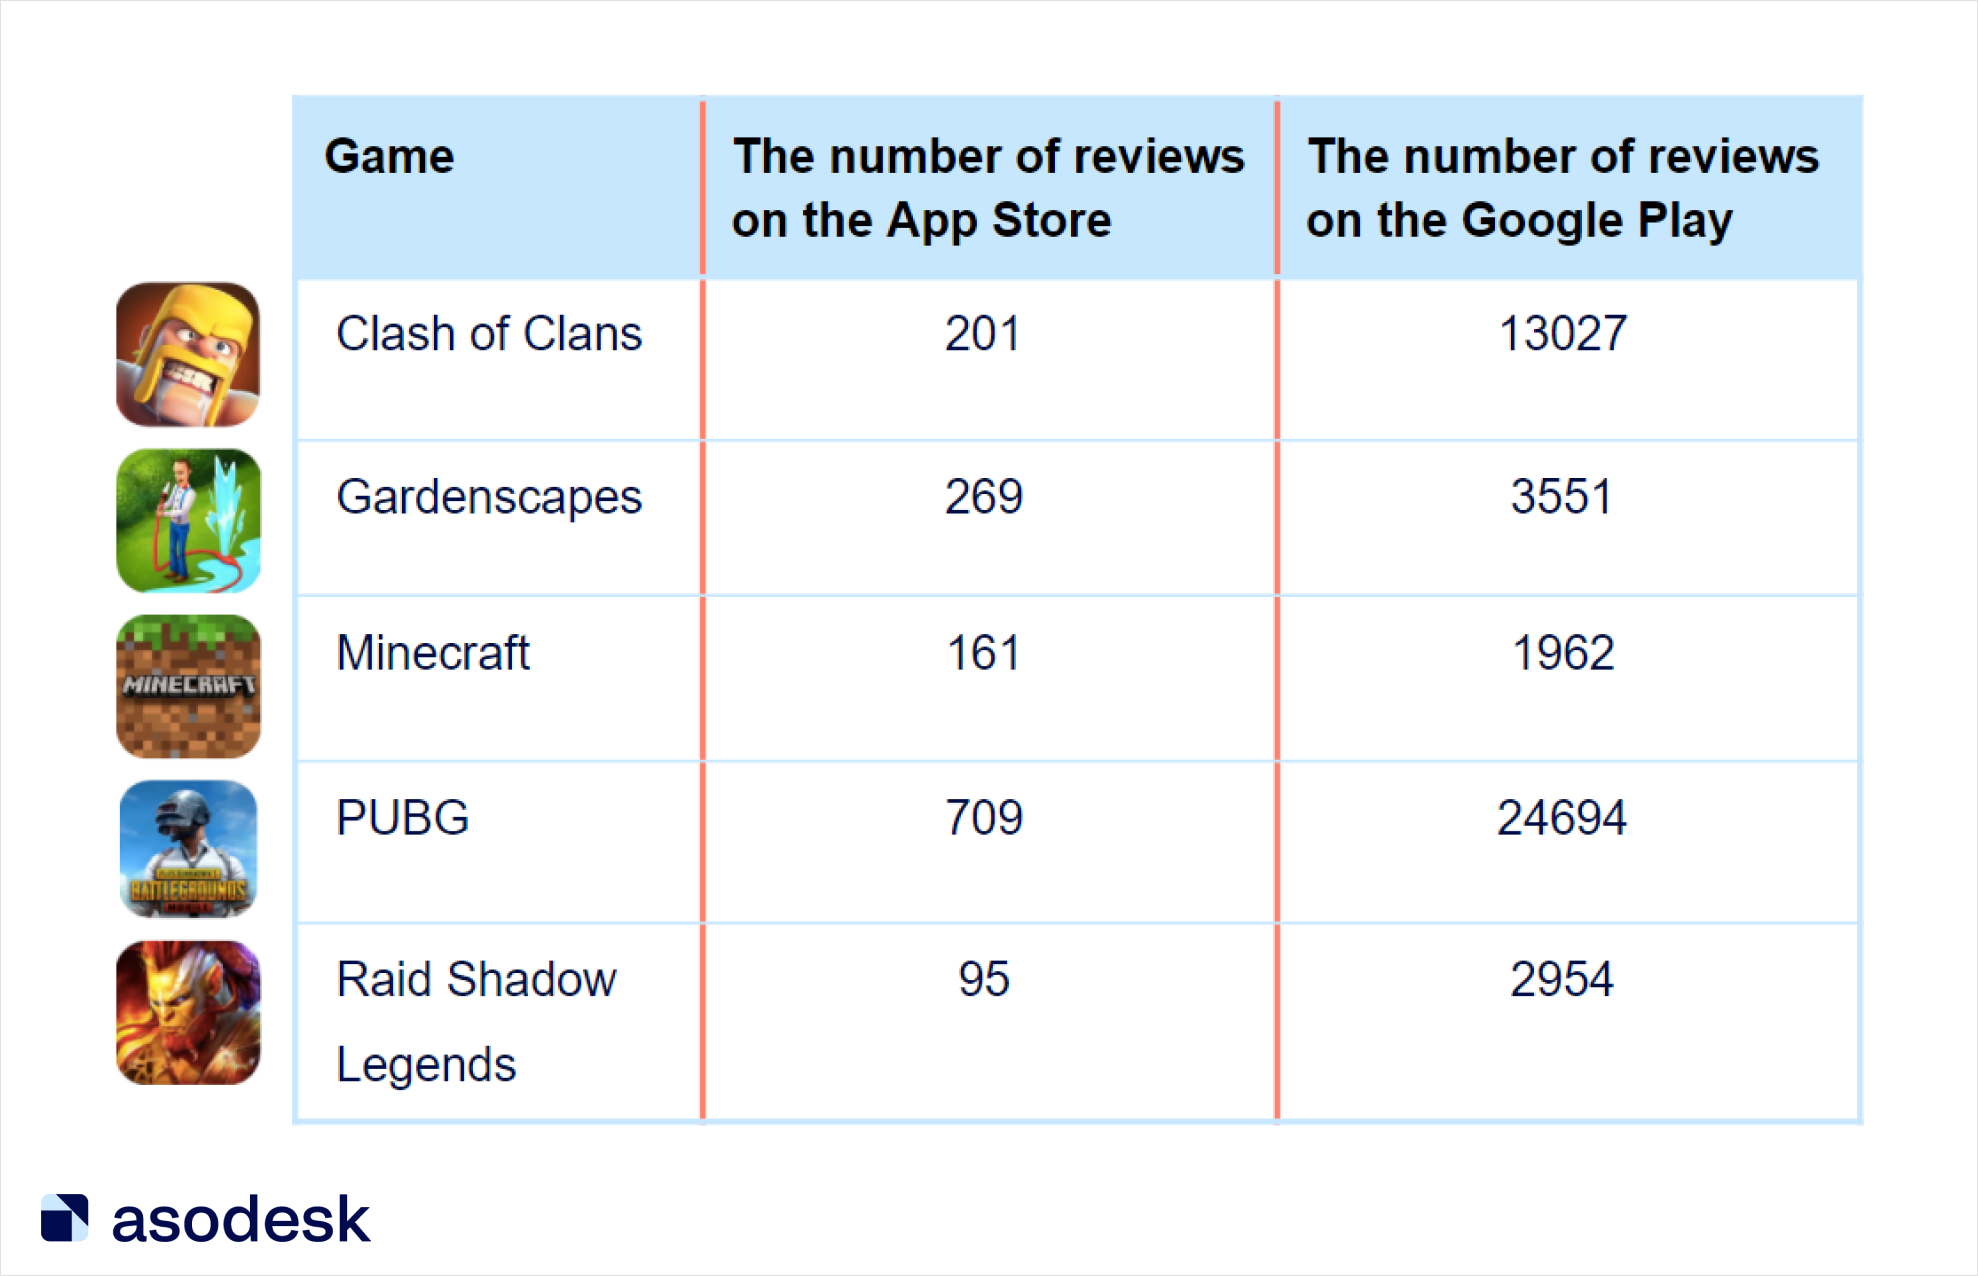 Google Play users are more likely to leave reviews on popular games